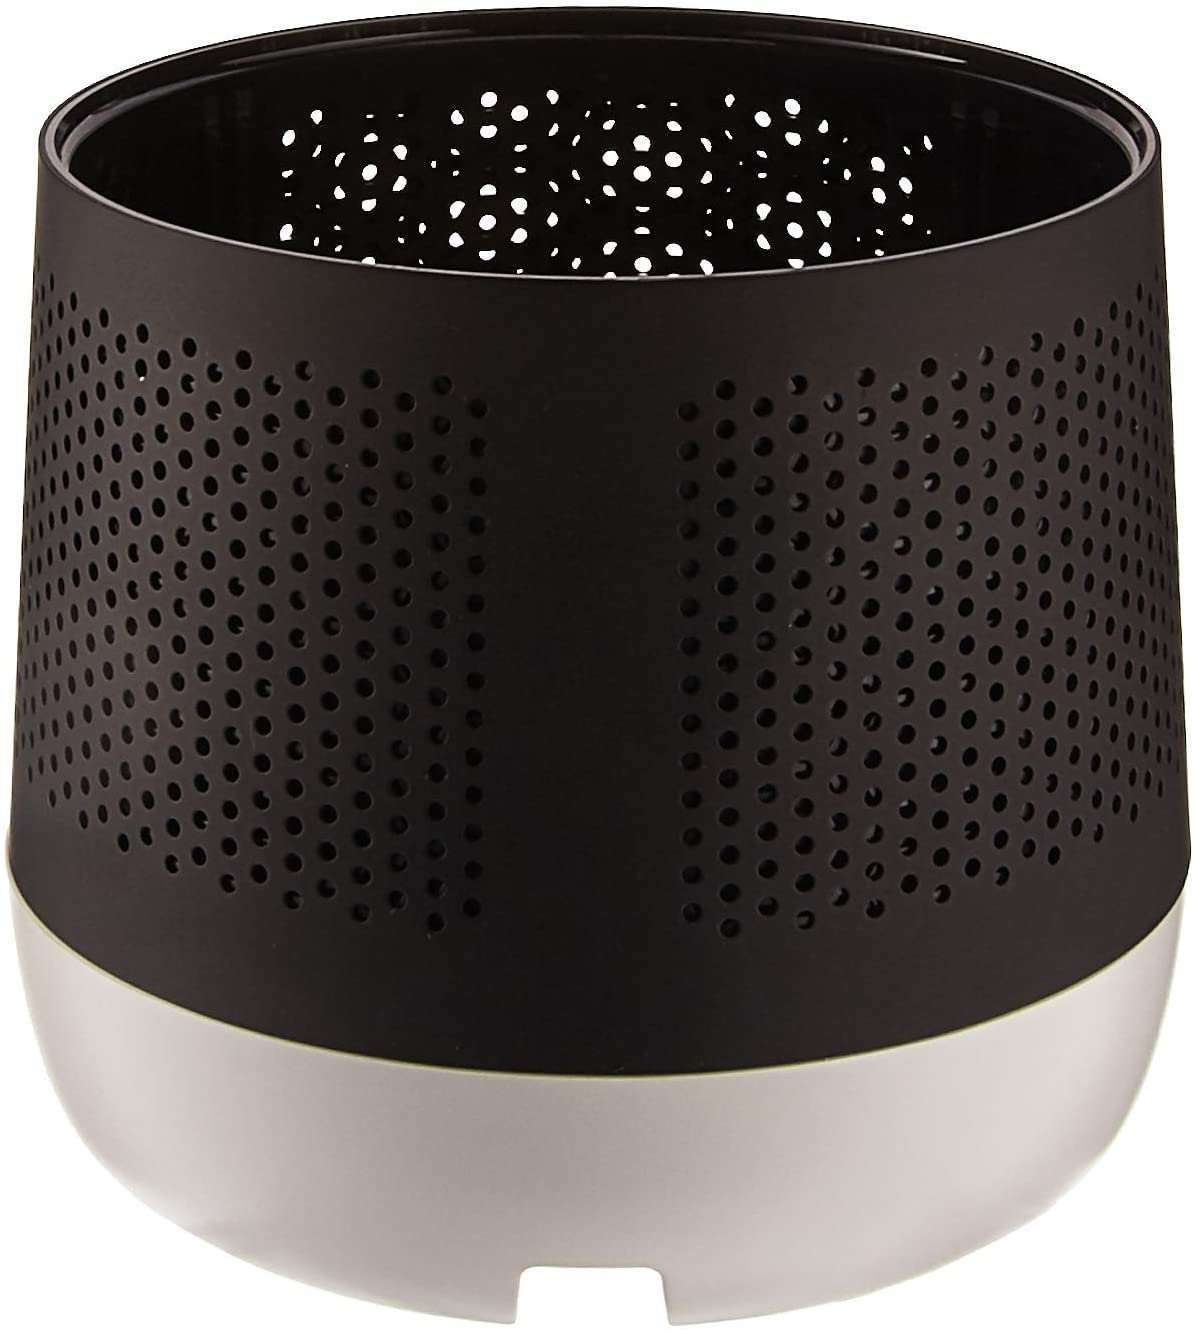 Ninety7 BATTERY Base for Google Home Audio/Video Product Carbon/Black (Loft Carbon)